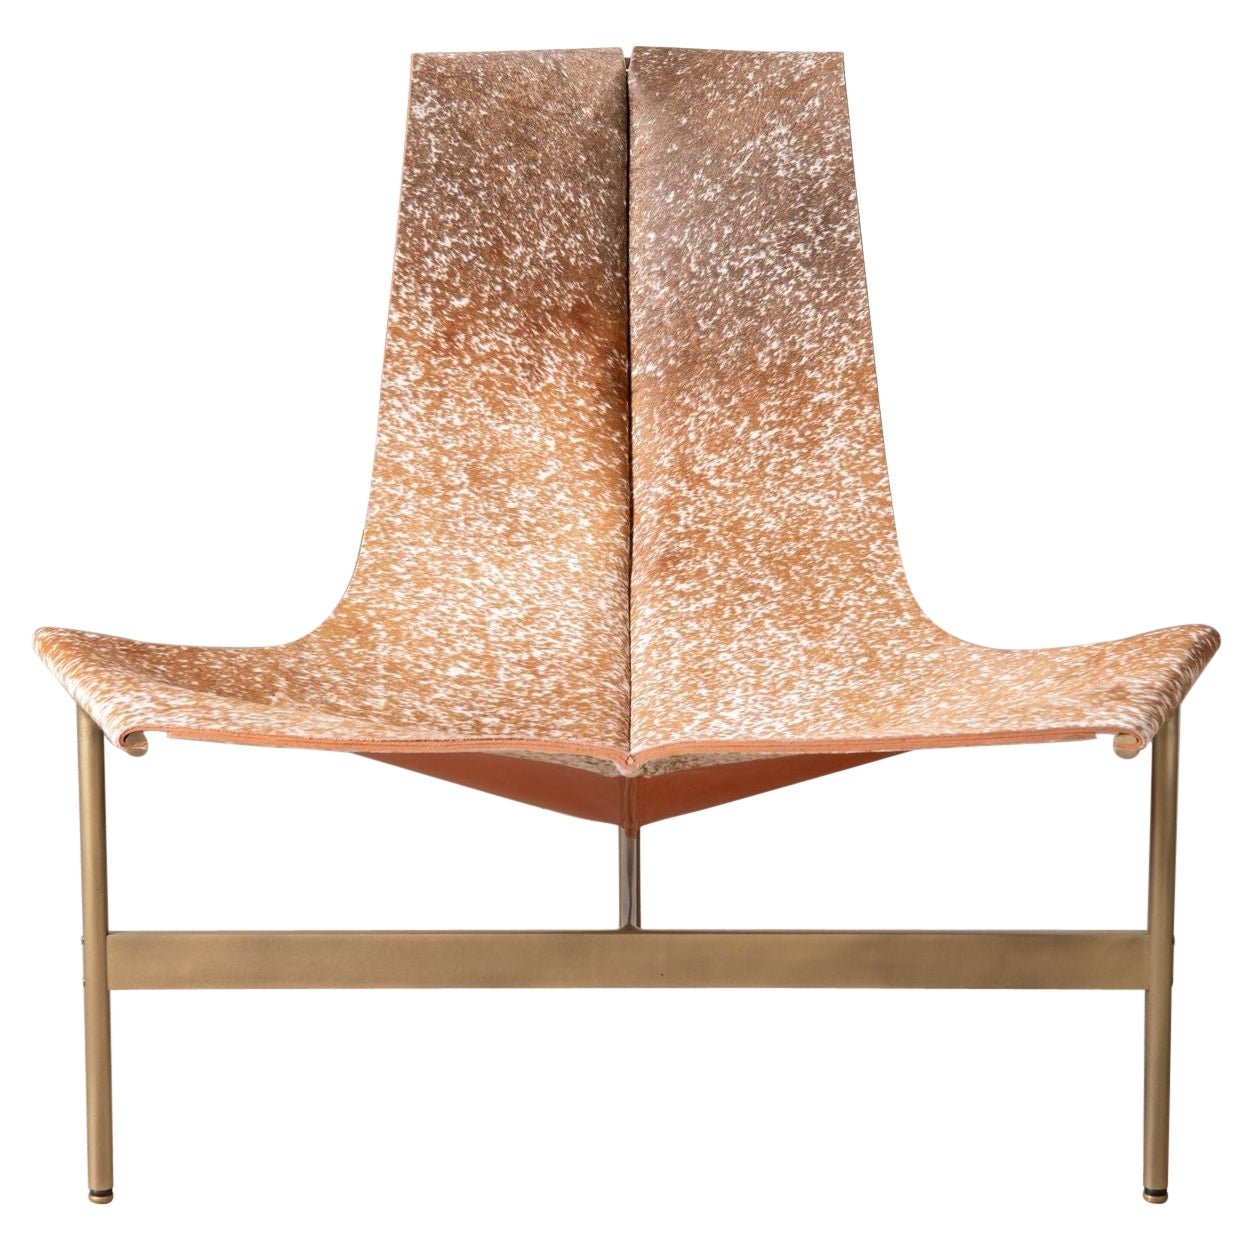 'TH-15' Sling Lounge Chair in bronze & hair on hide by Katavolos Littell & Kelly